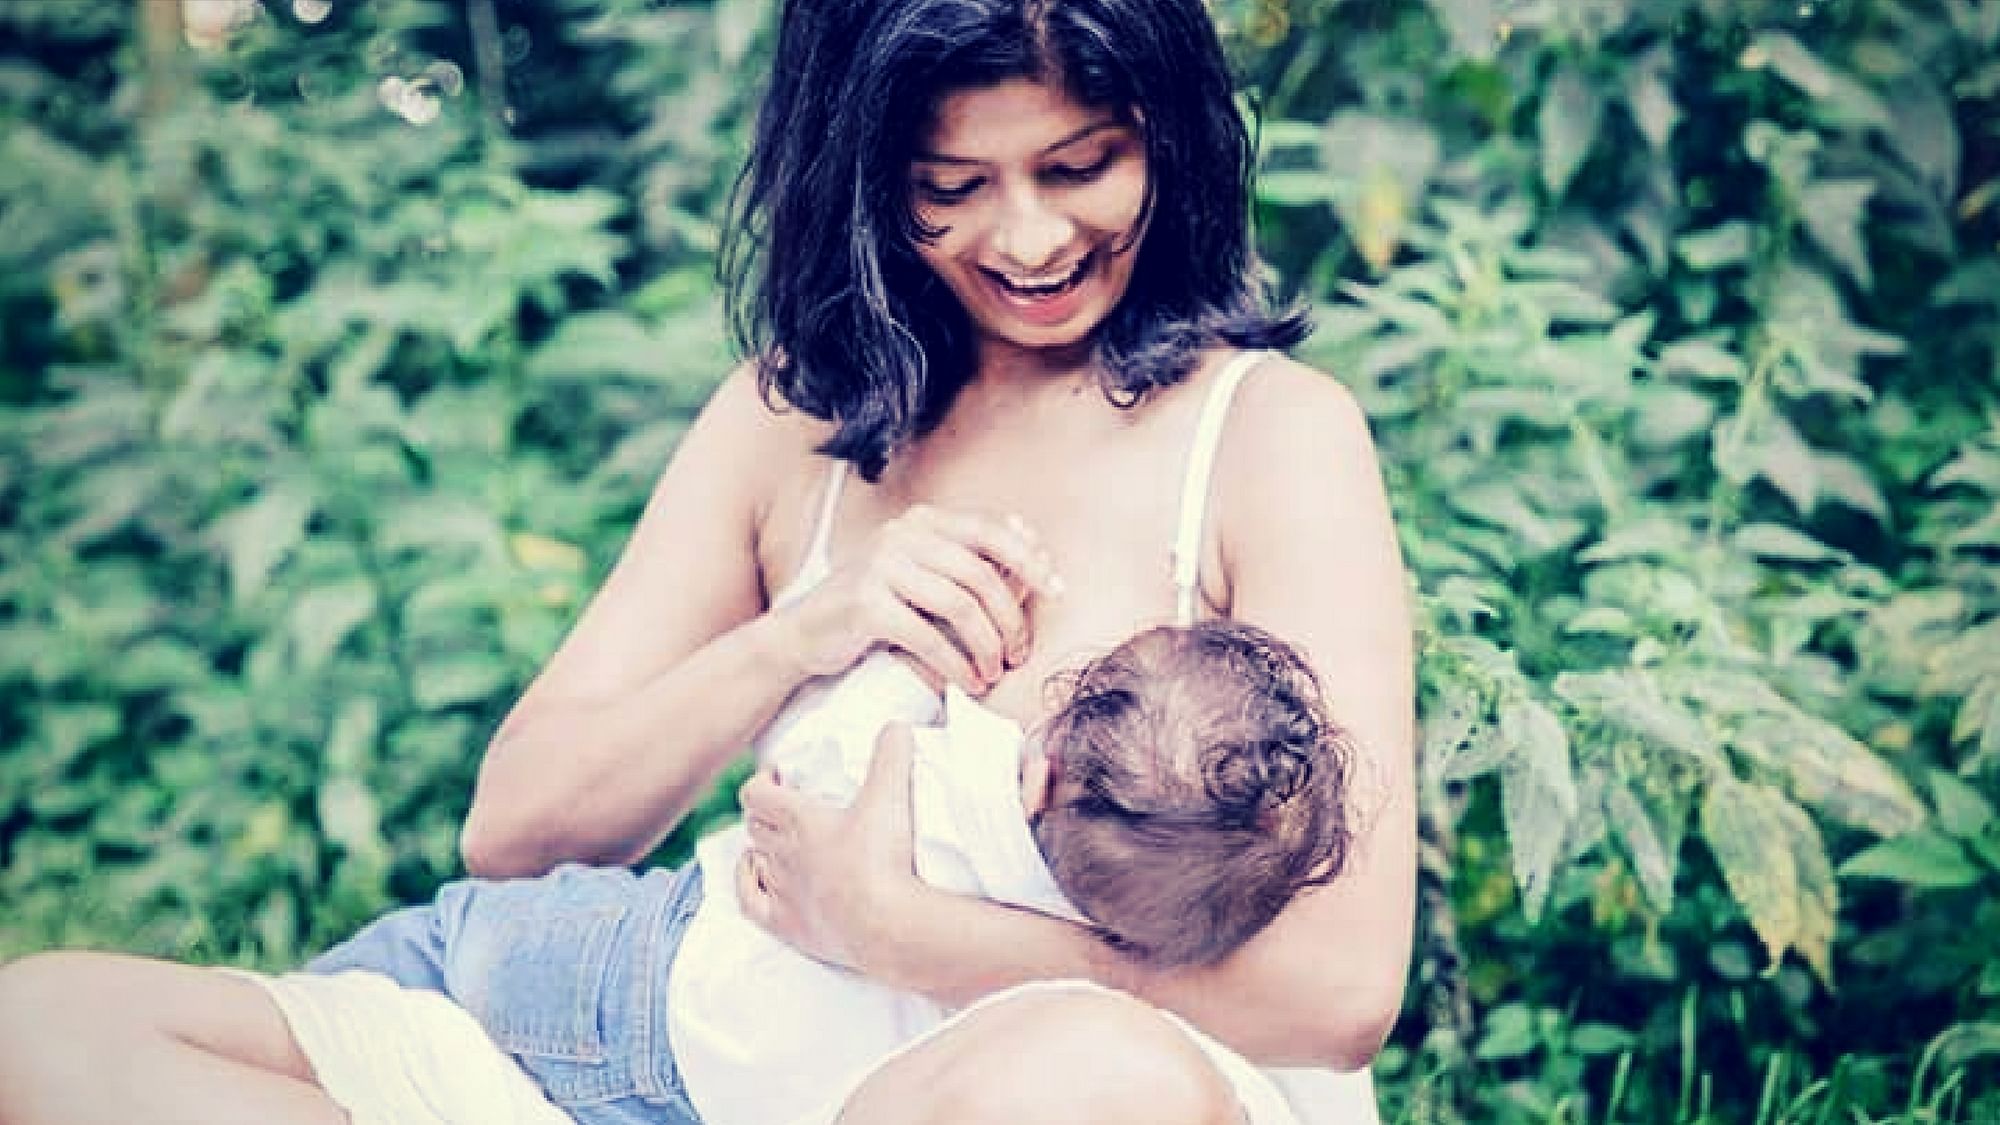 World Health Organizaton and the Indian Academy of Paediatrics (IAP) recommend up to six months of exclusive breastfeeding.